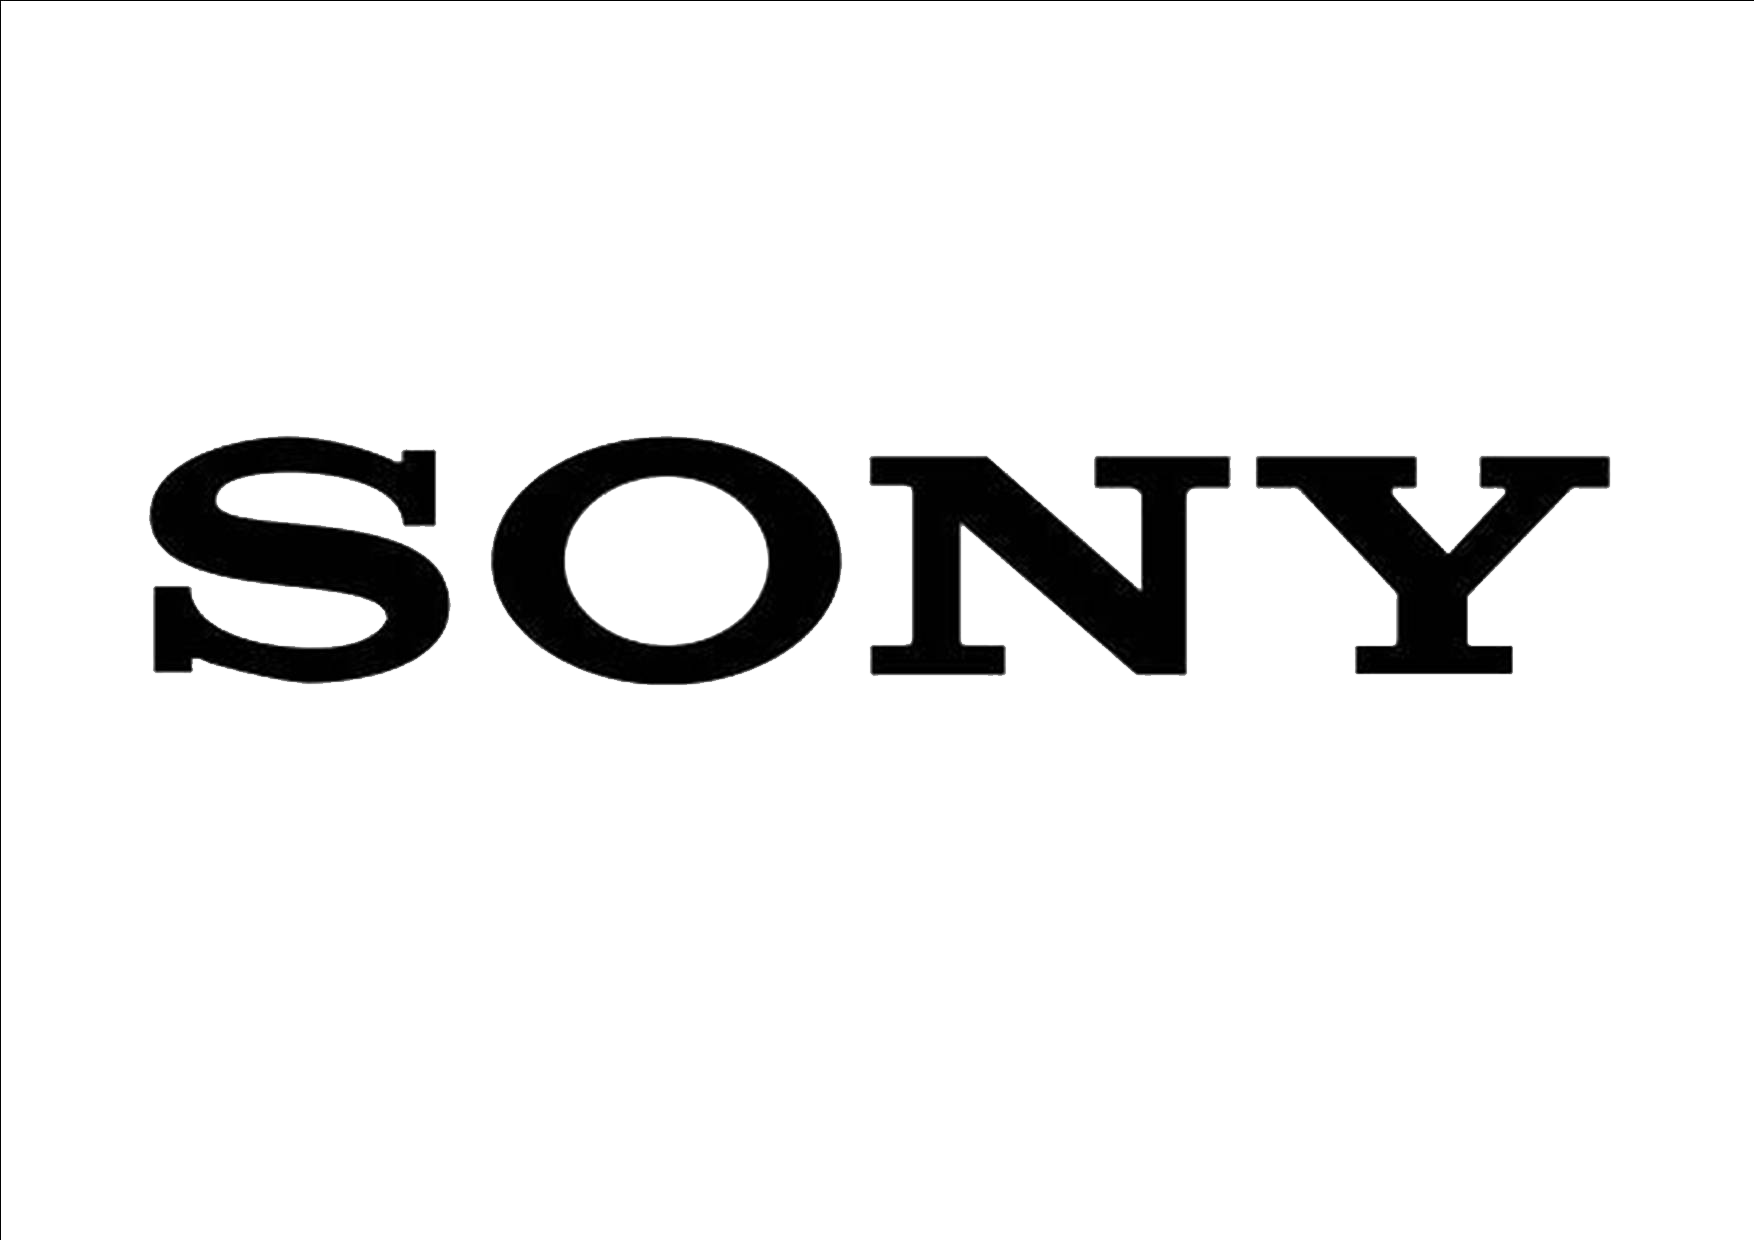 Free Sony Logo Png Transparent, Download Free Clip Art, Free Clip Pluspng.com  - Sony, Transparent background PNG HD thumbnail